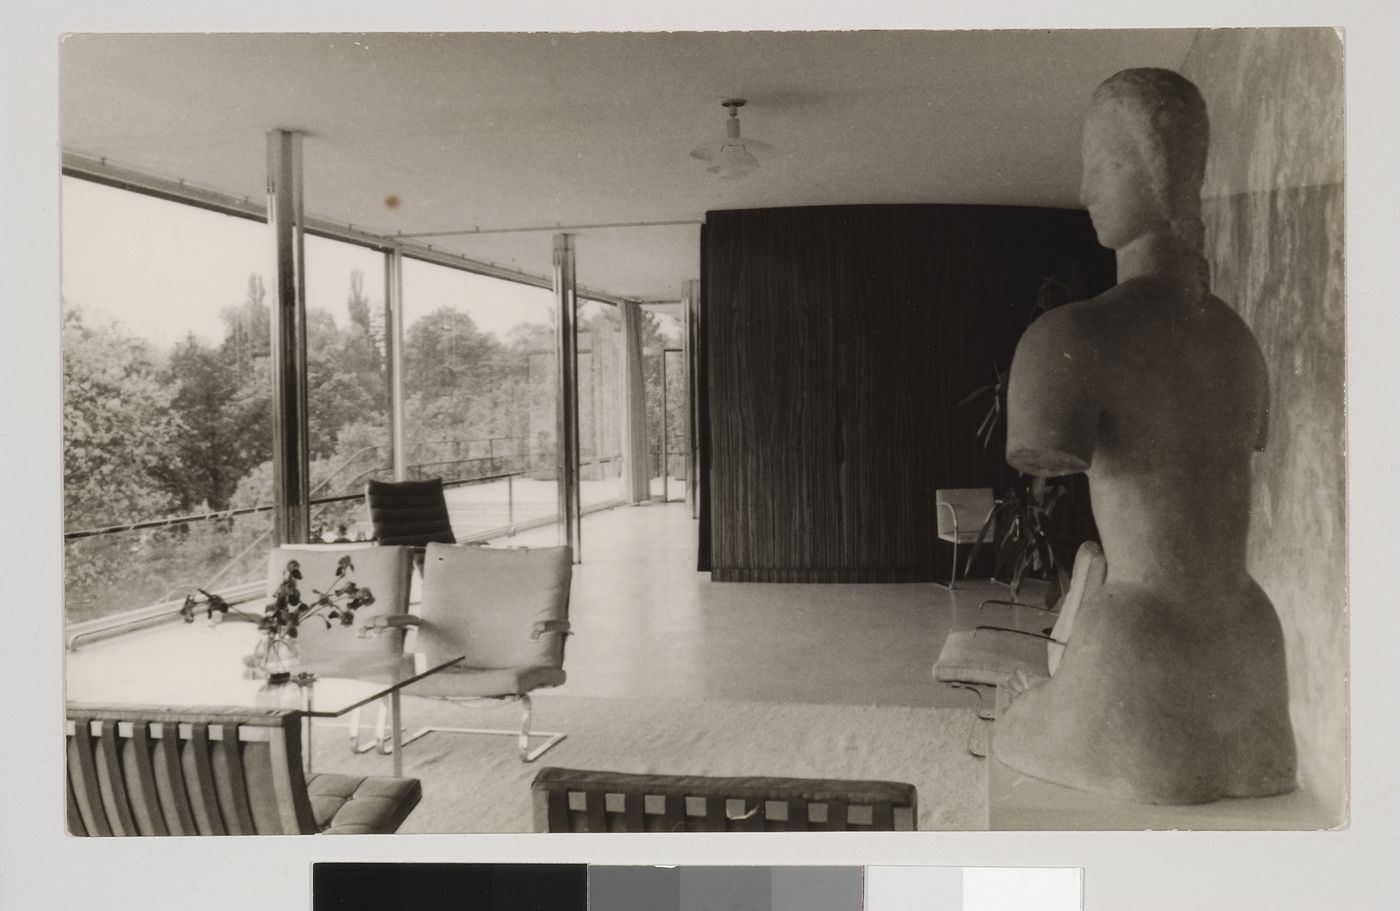 Interior view of the living area looking west showing a seating area on the left and a statue on the right, Tugendhat House, Brno, Czechoslovakia (now Czech Republic)